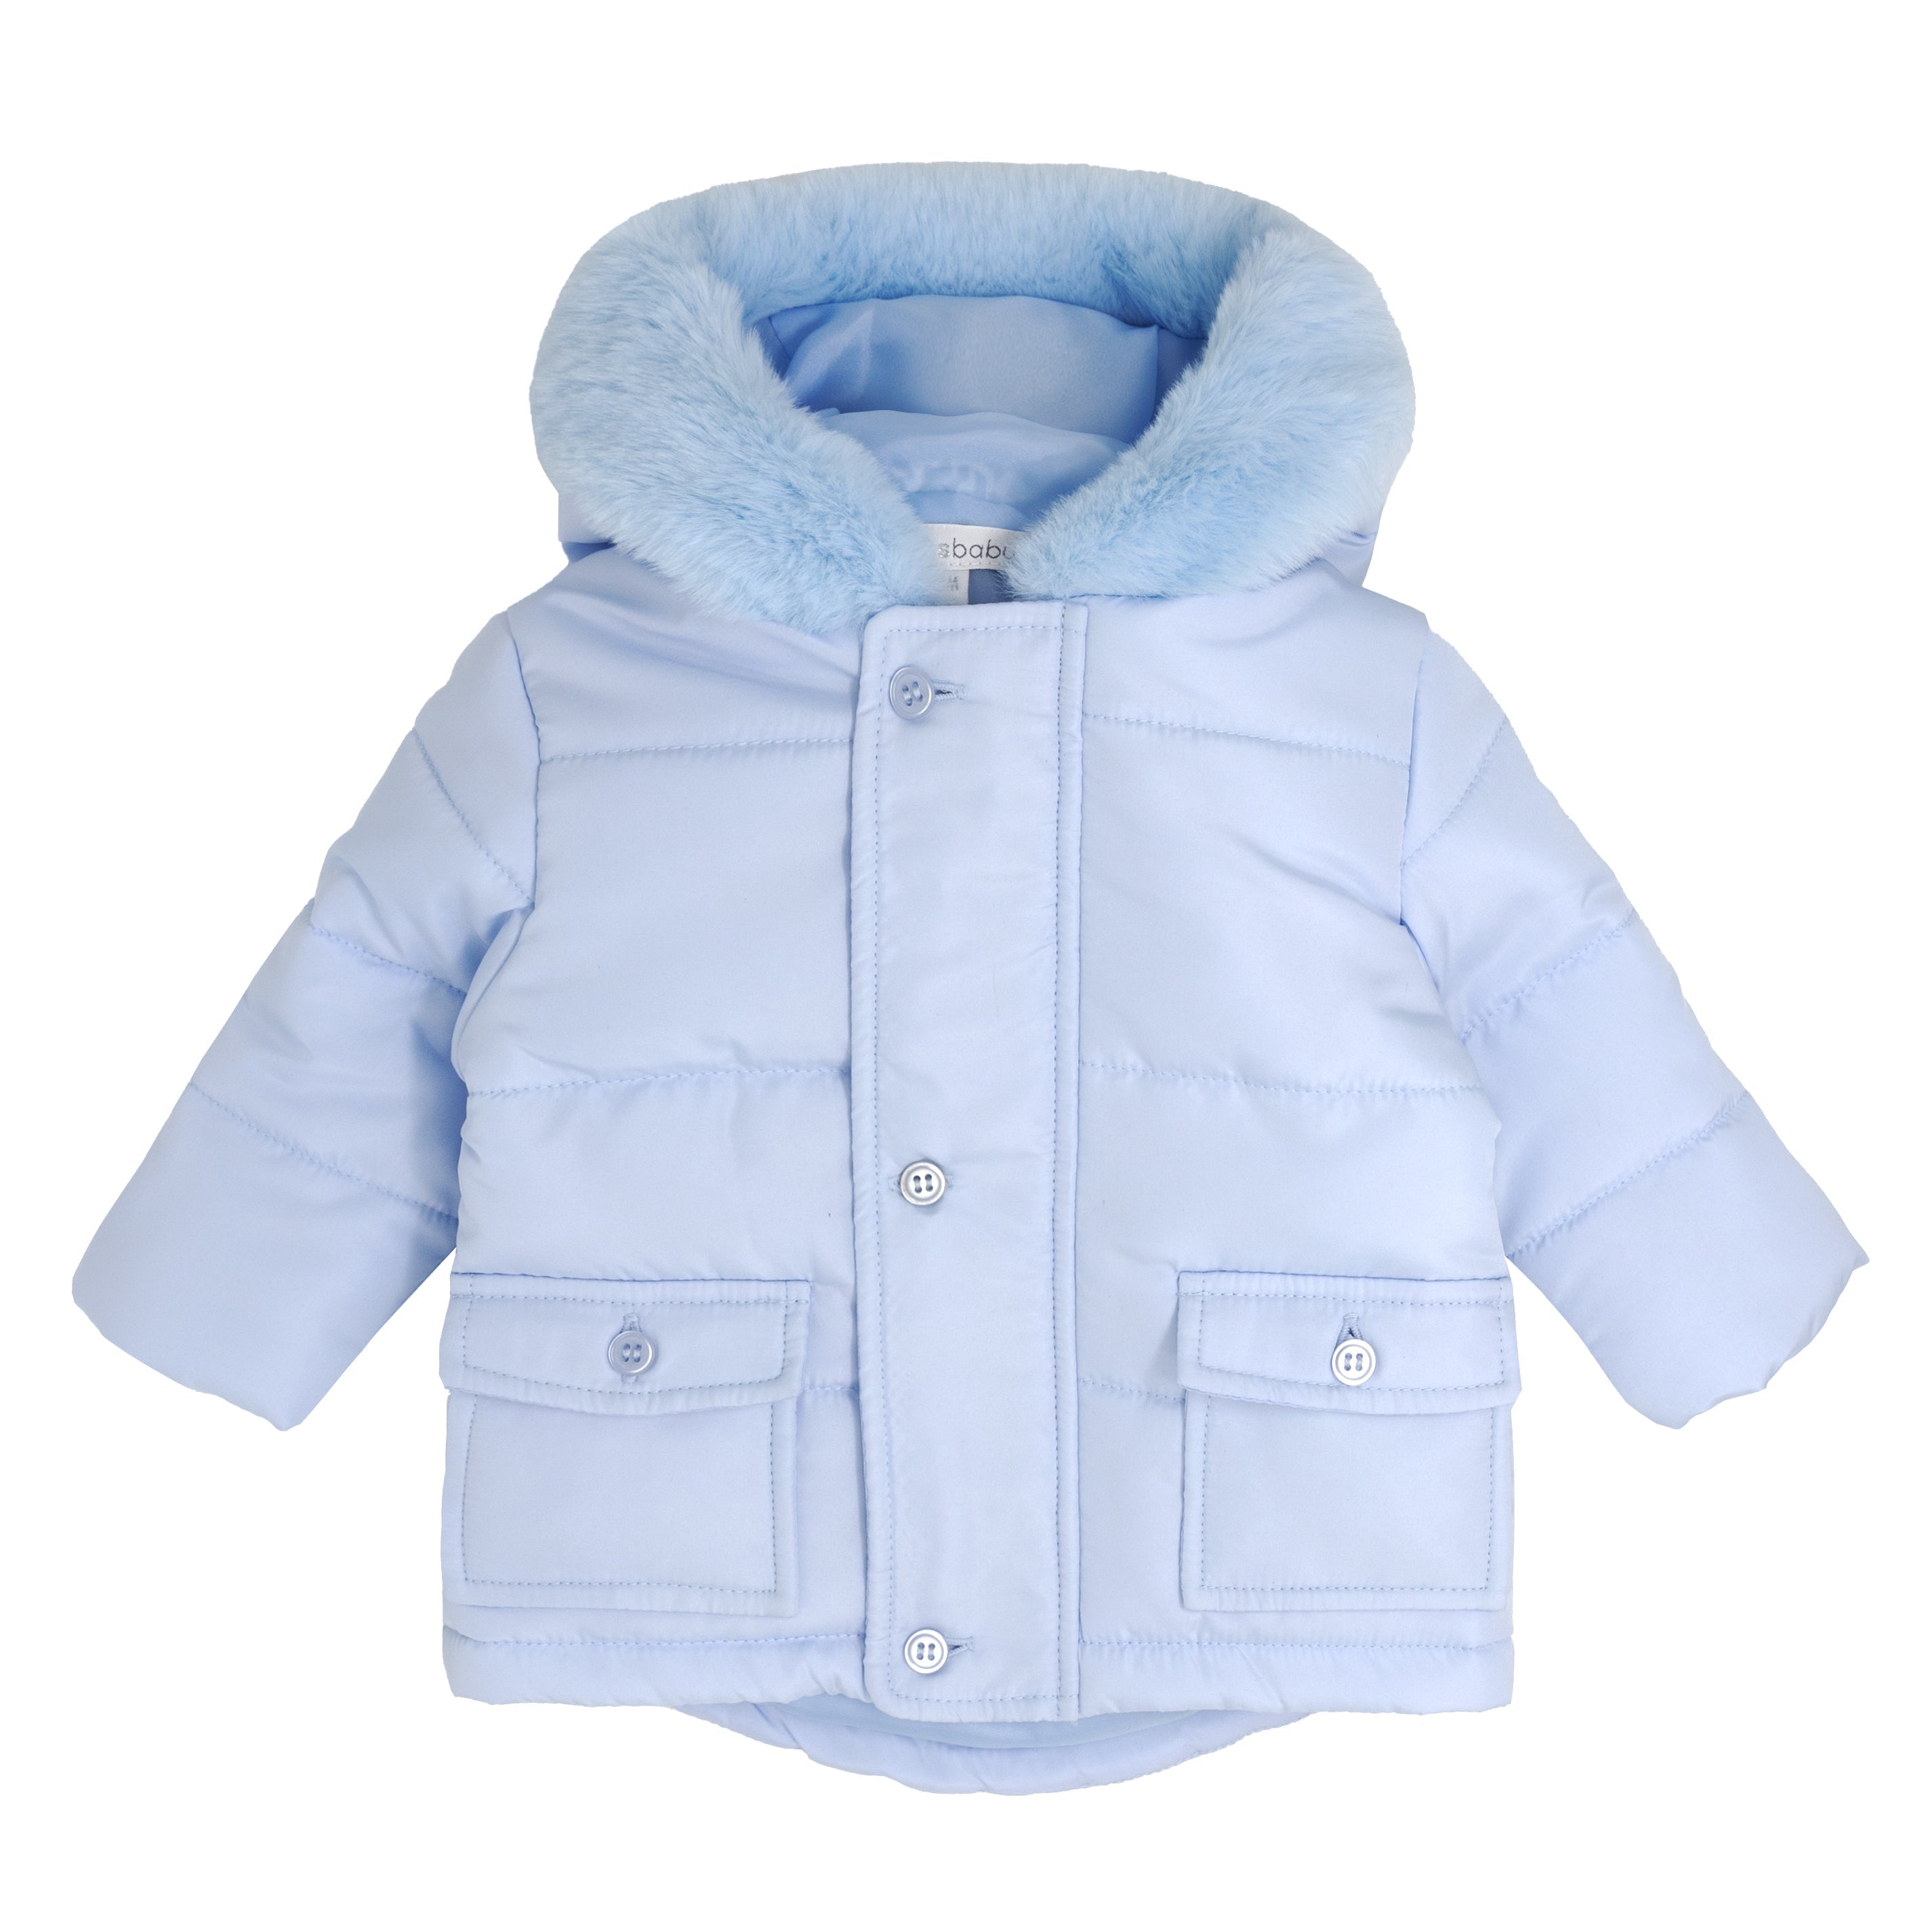 Boys Parka with concealed zipper and fur hood